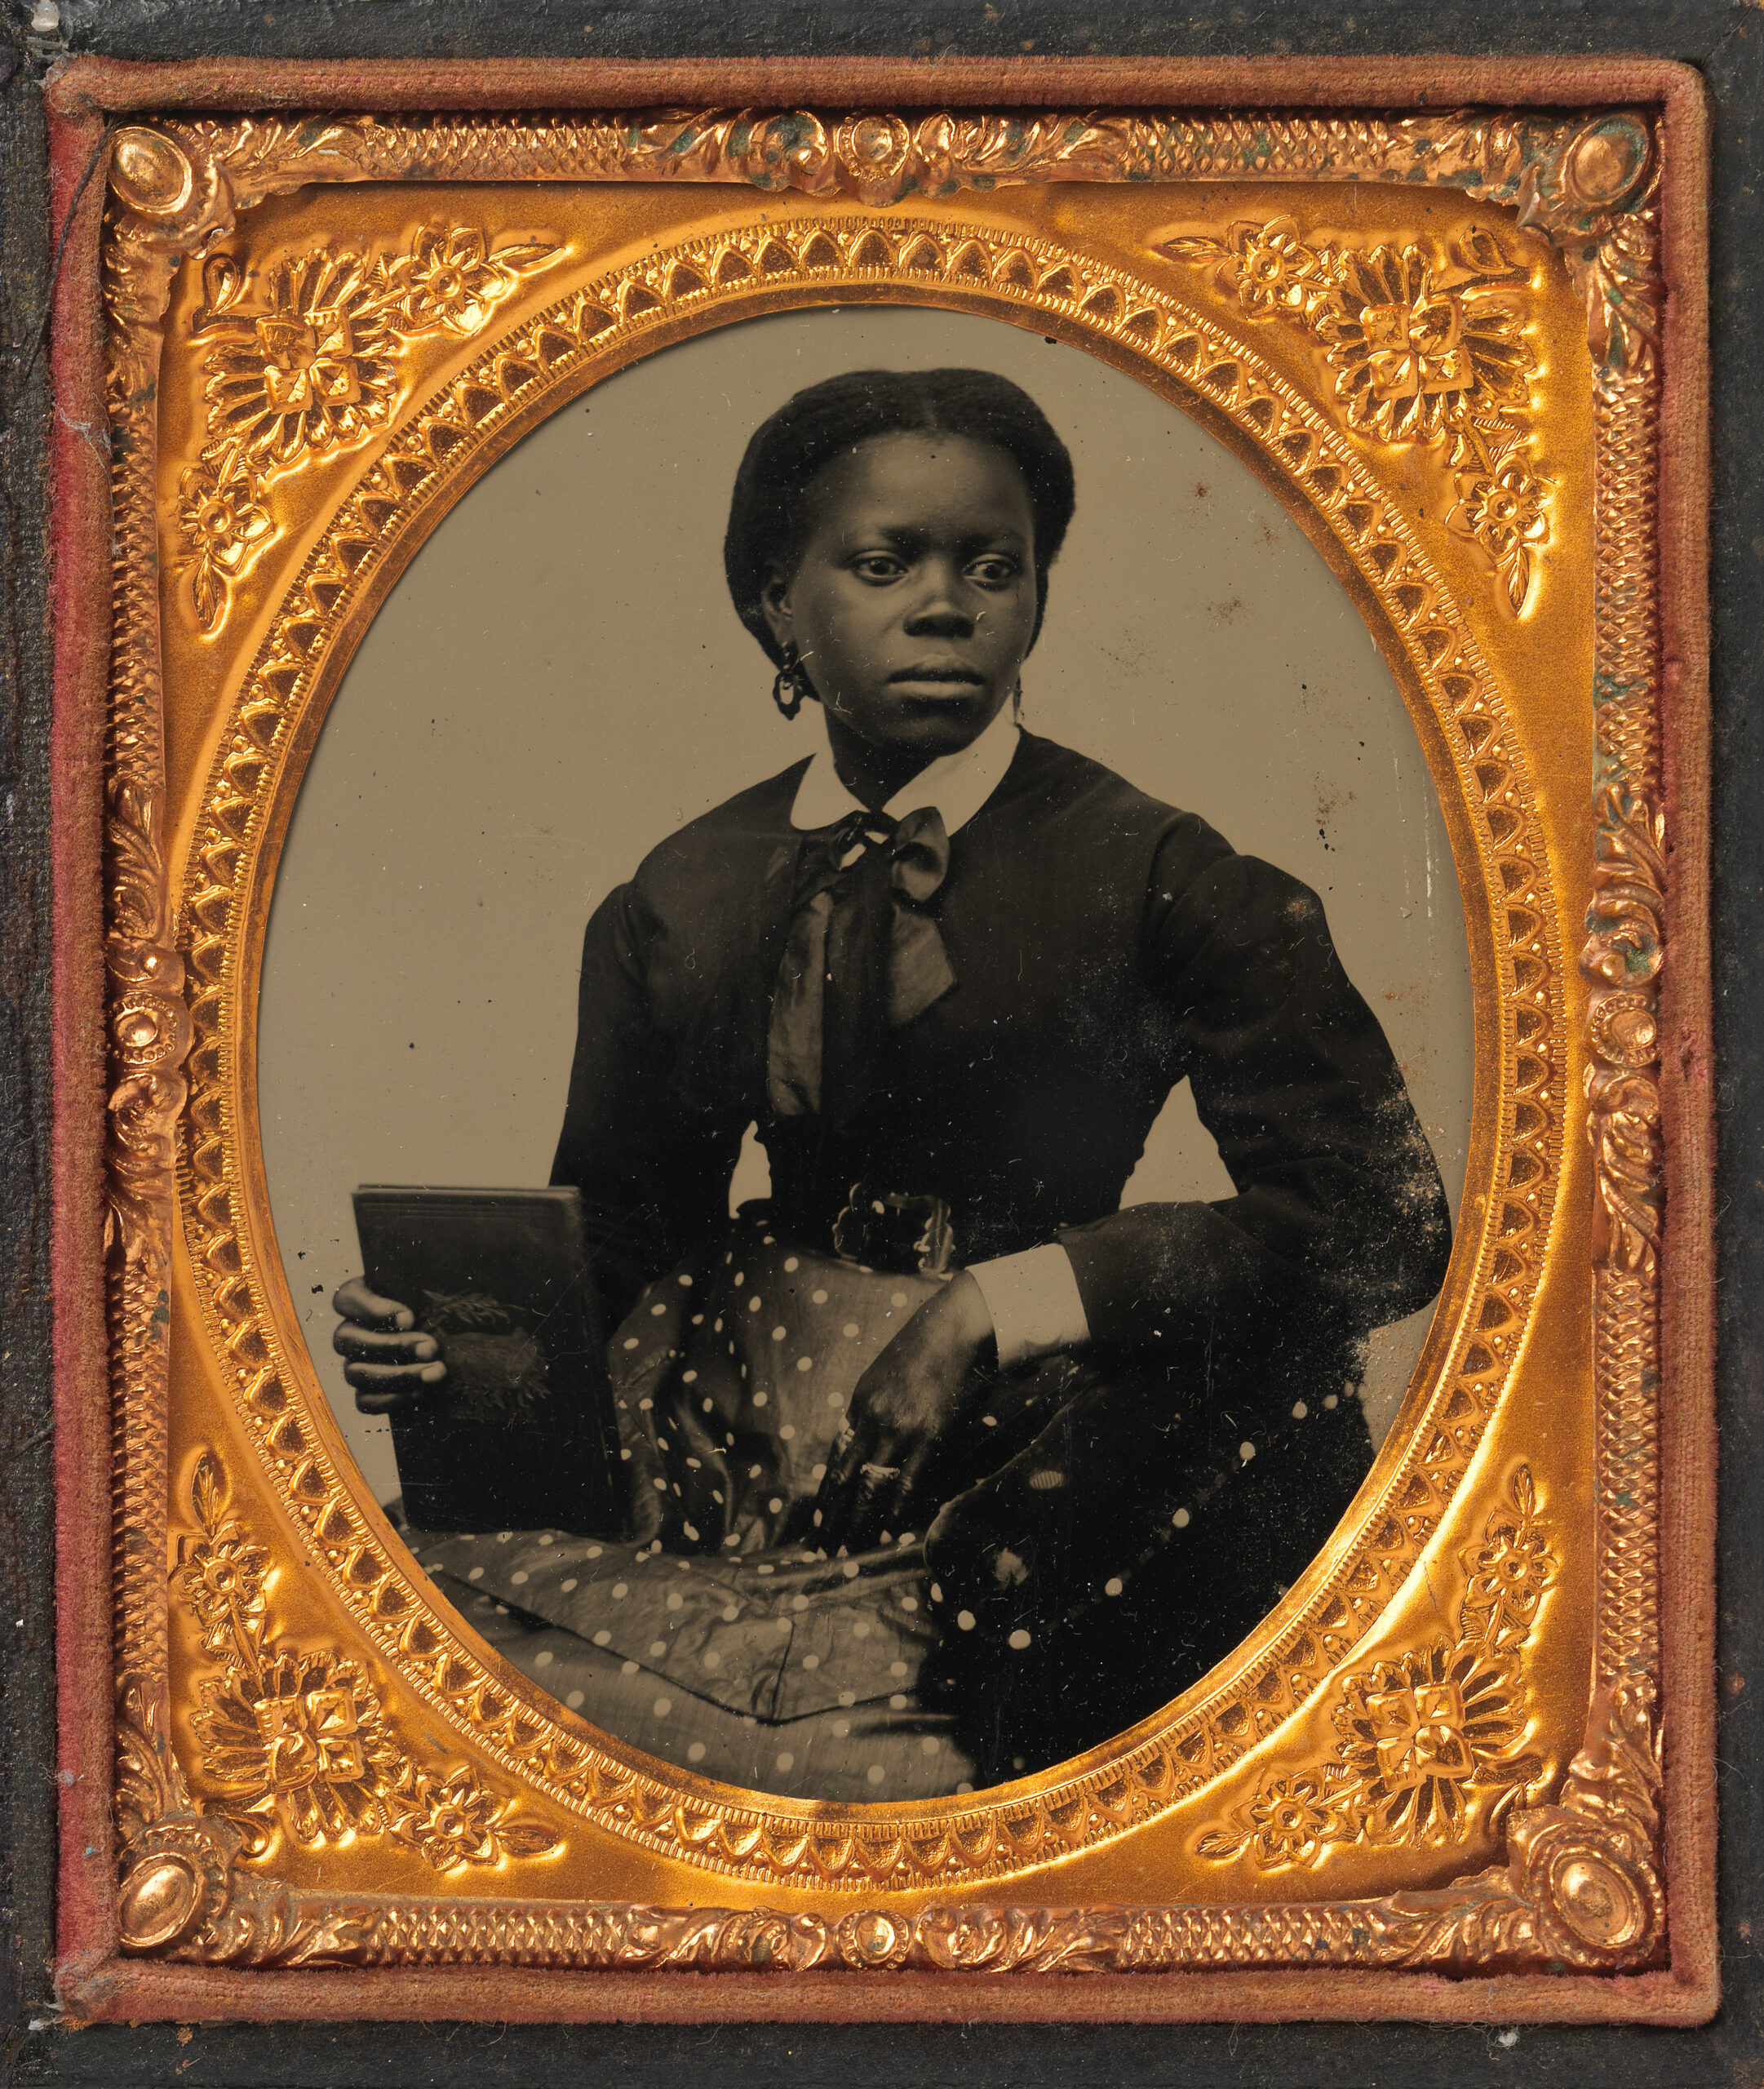 Artist not recorded, Untitled, late 19th century, daguerreotype, 3 7/8 × 3 1/2 × 3/4 in., Los Angeles County Museum of Art, Ralph M. Parsons Fund, photo © Museum Associates/LACMA